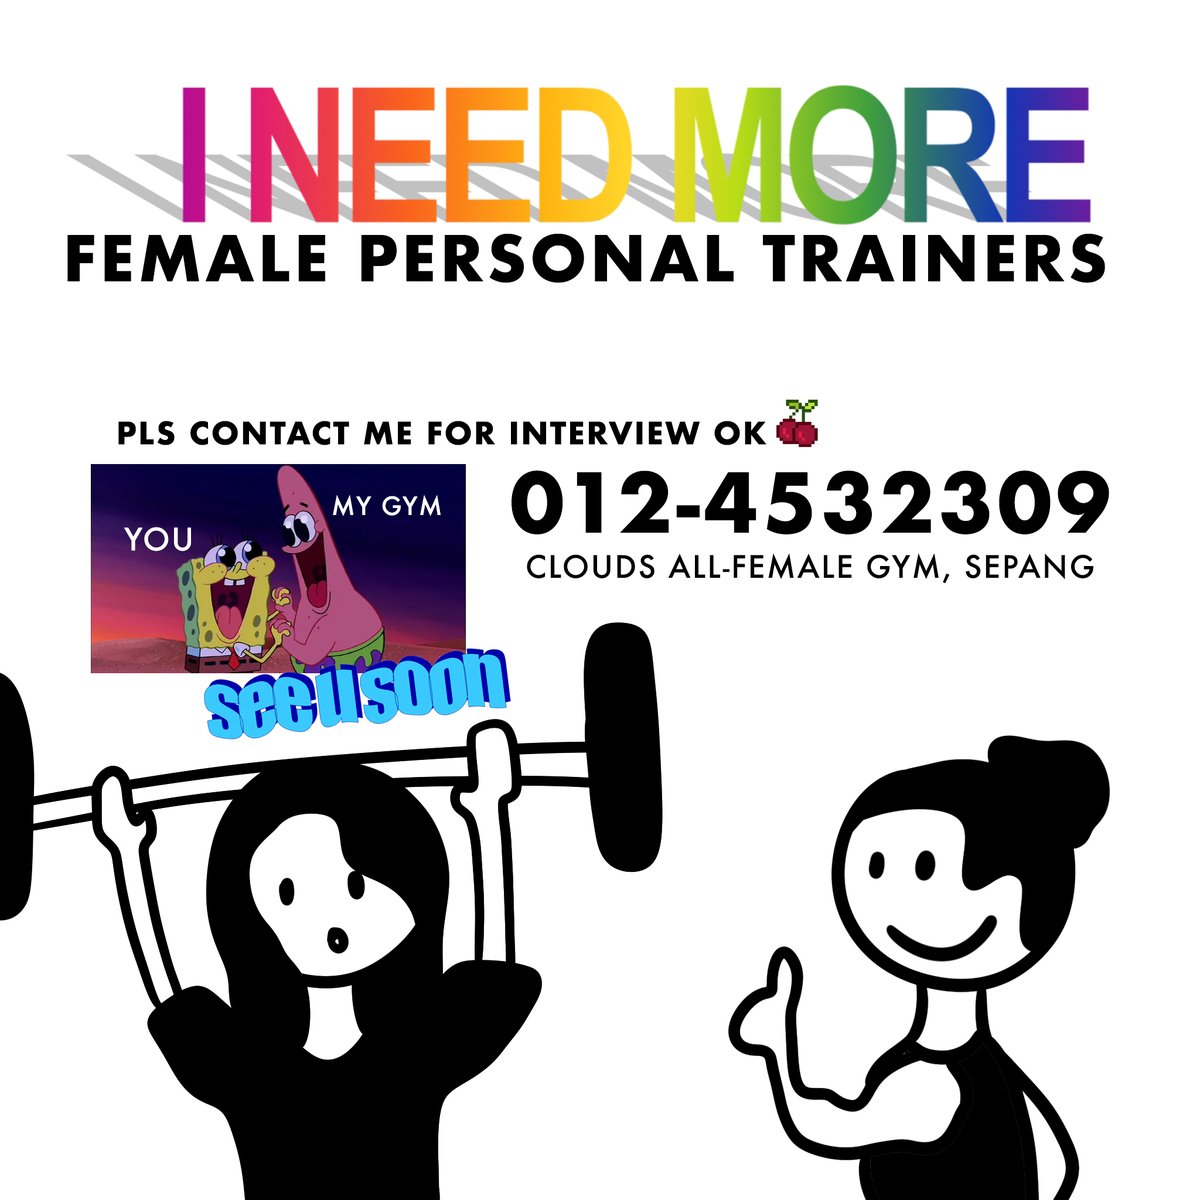 HI GIRLS IM LOOKING FOR MORE FEMALE PERSONAL TRAINERS FOR MY ALL-FEMALE GYM IN SEPANG HELP A SIS OUT XOXO